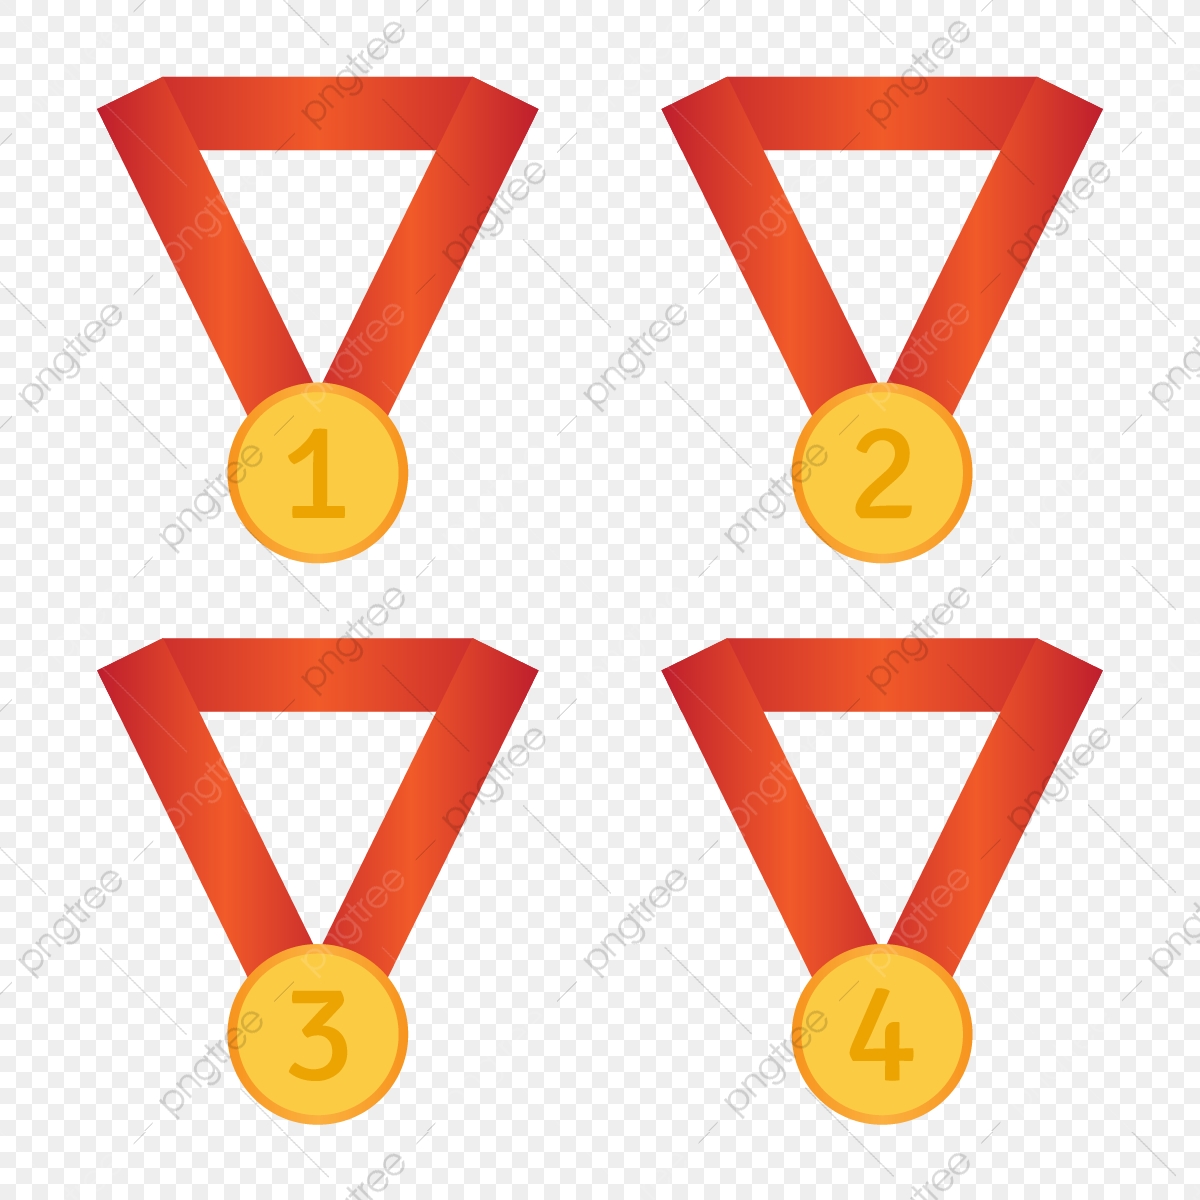 medal clipart abstract